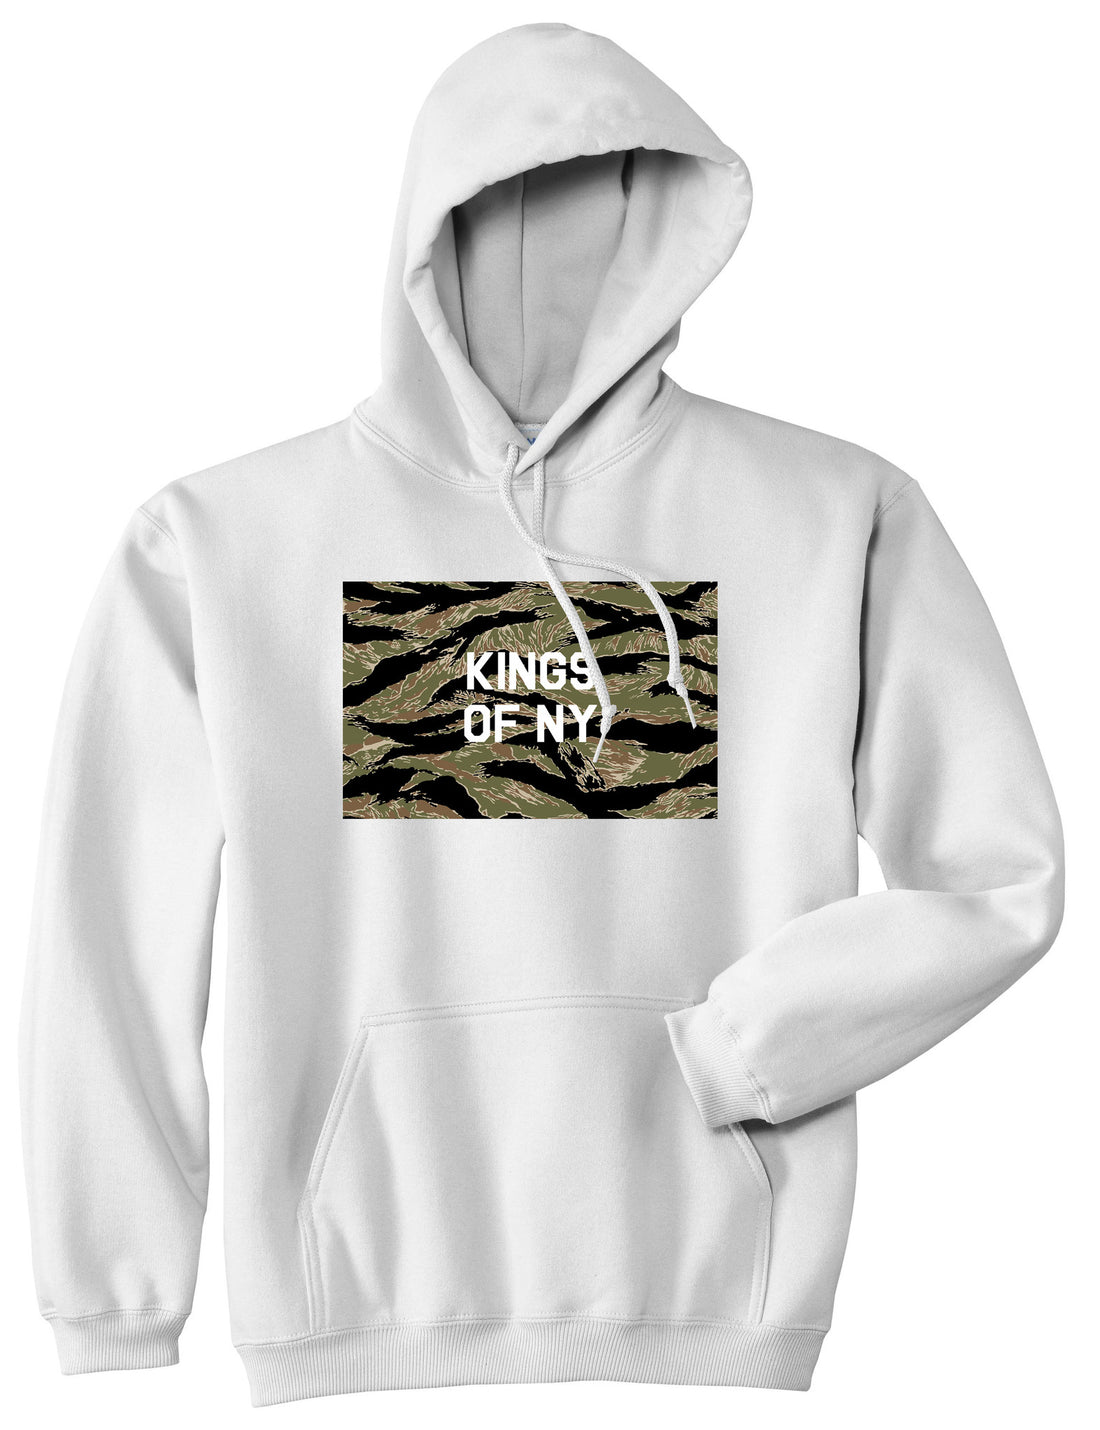 Tiger Stripe Camo Army Pullover Hoodie in White